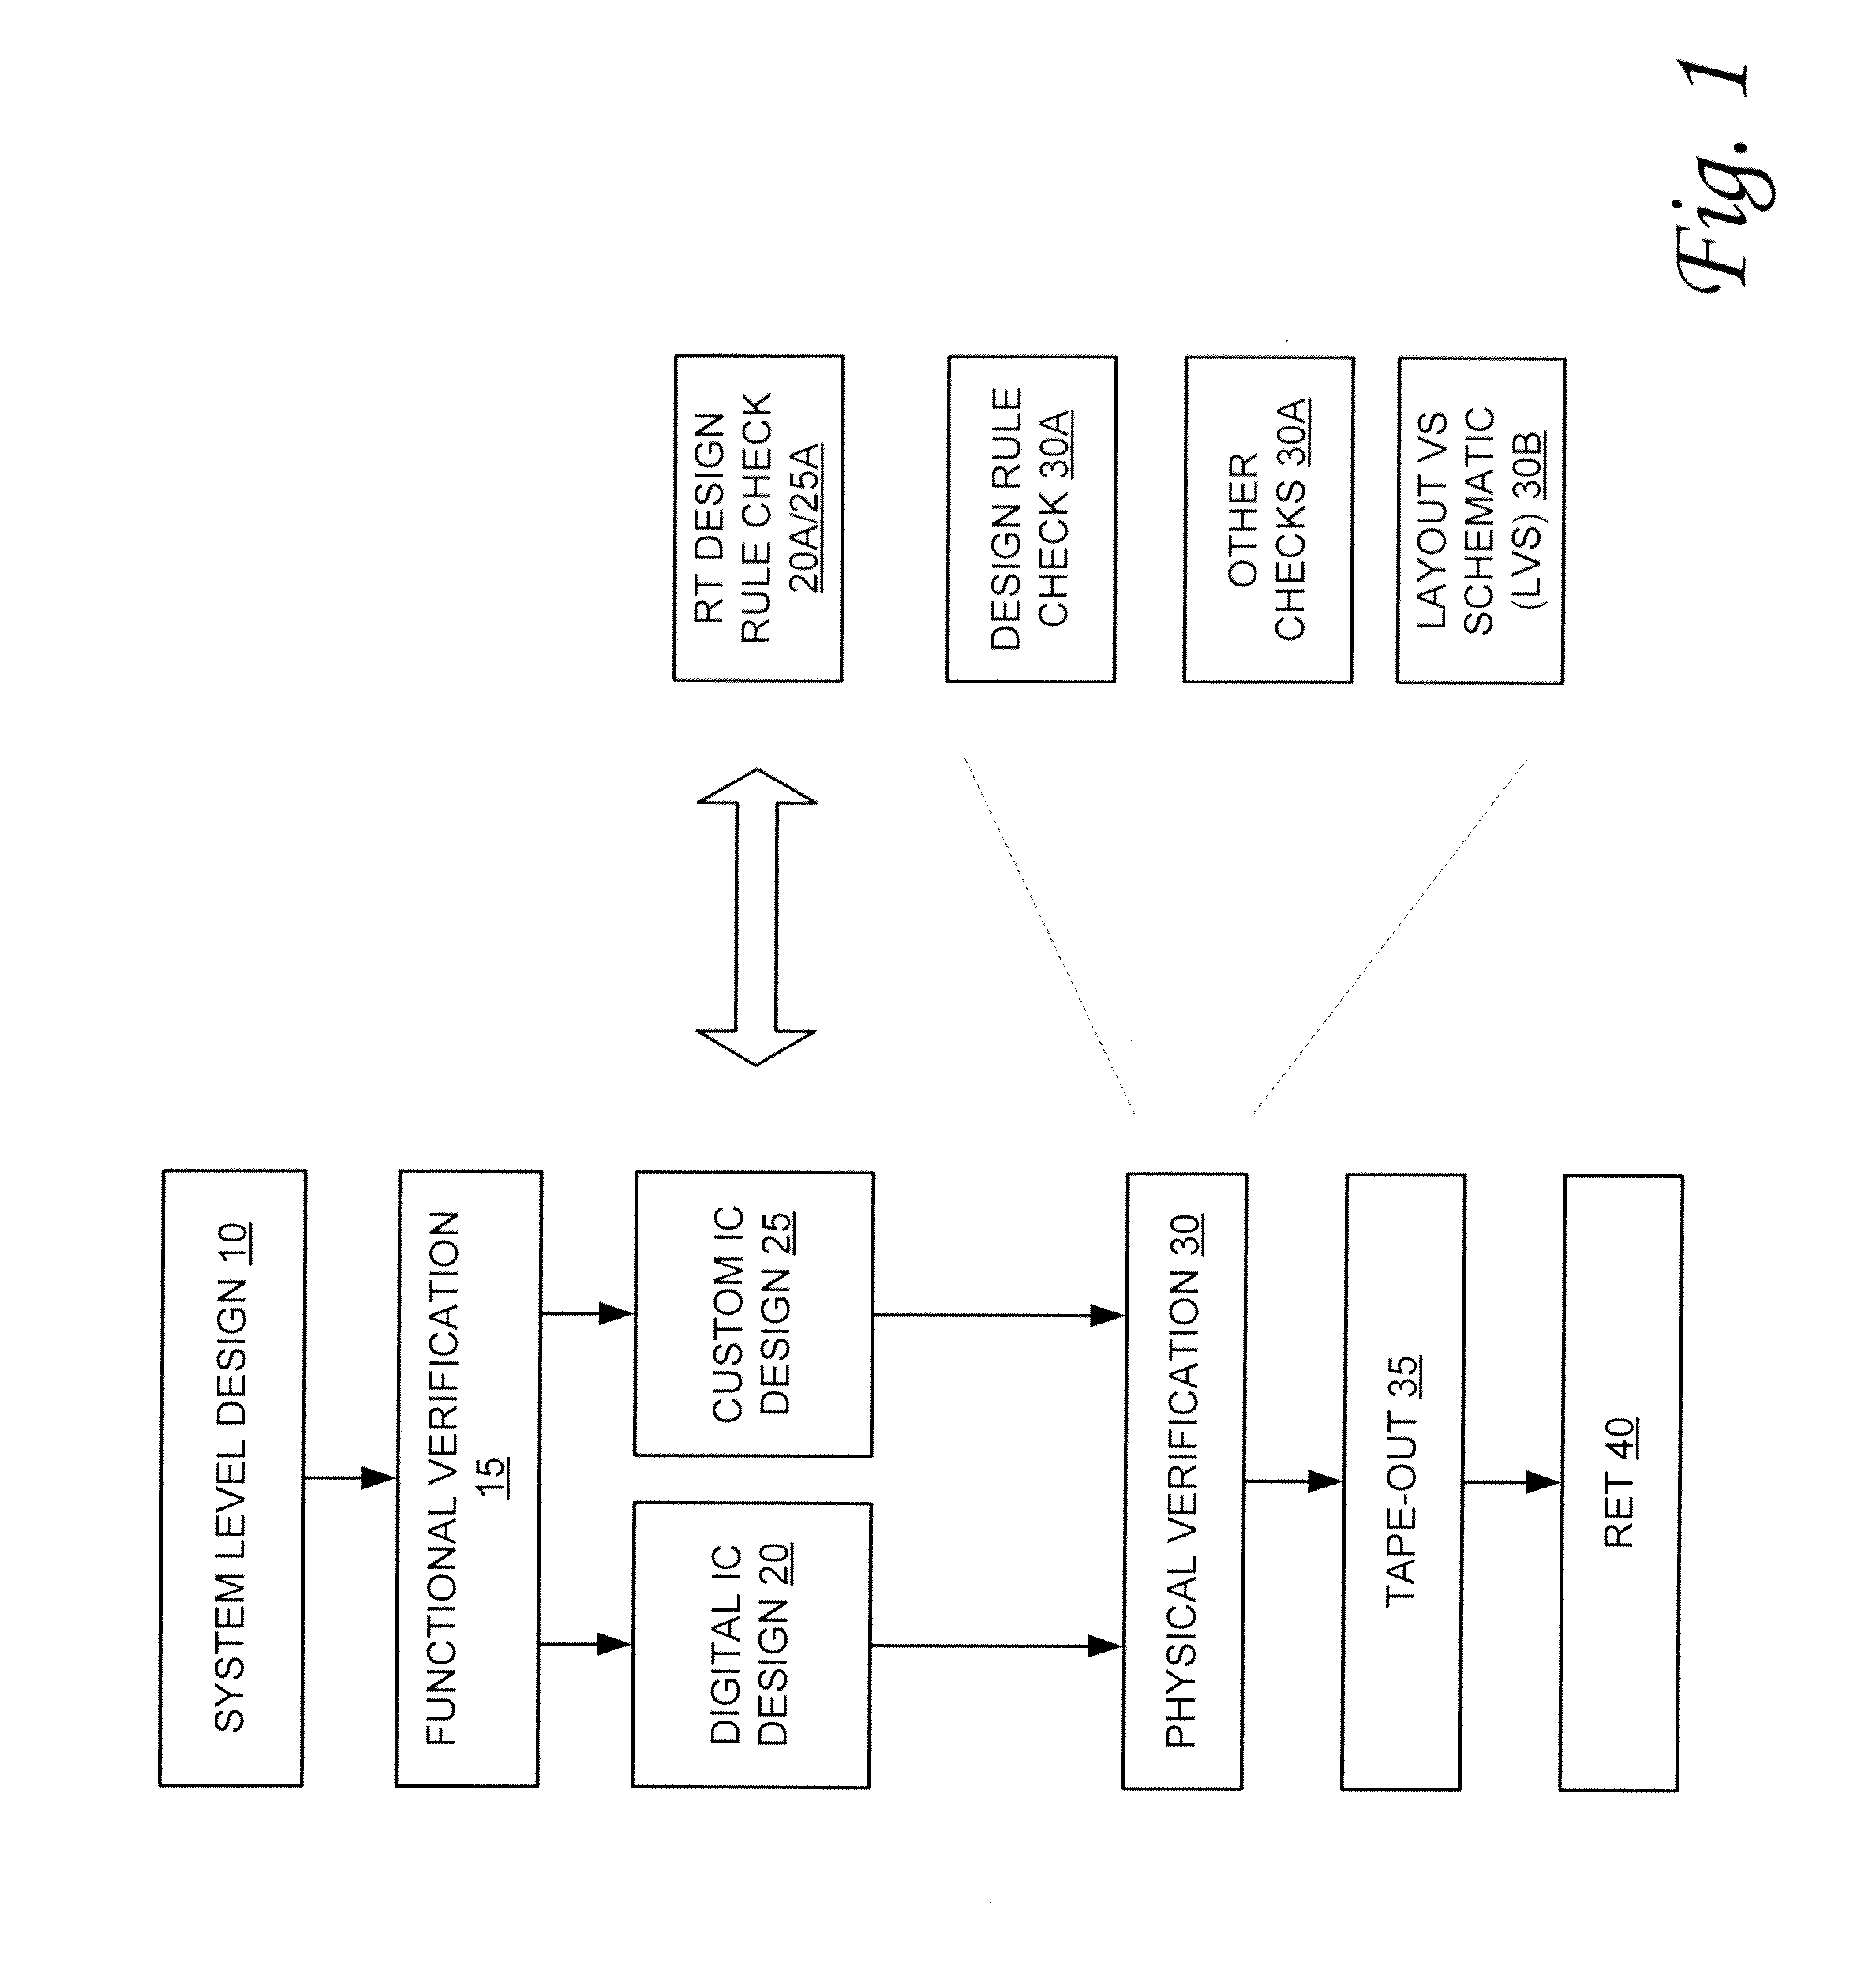 System and method for automated real-time design checking